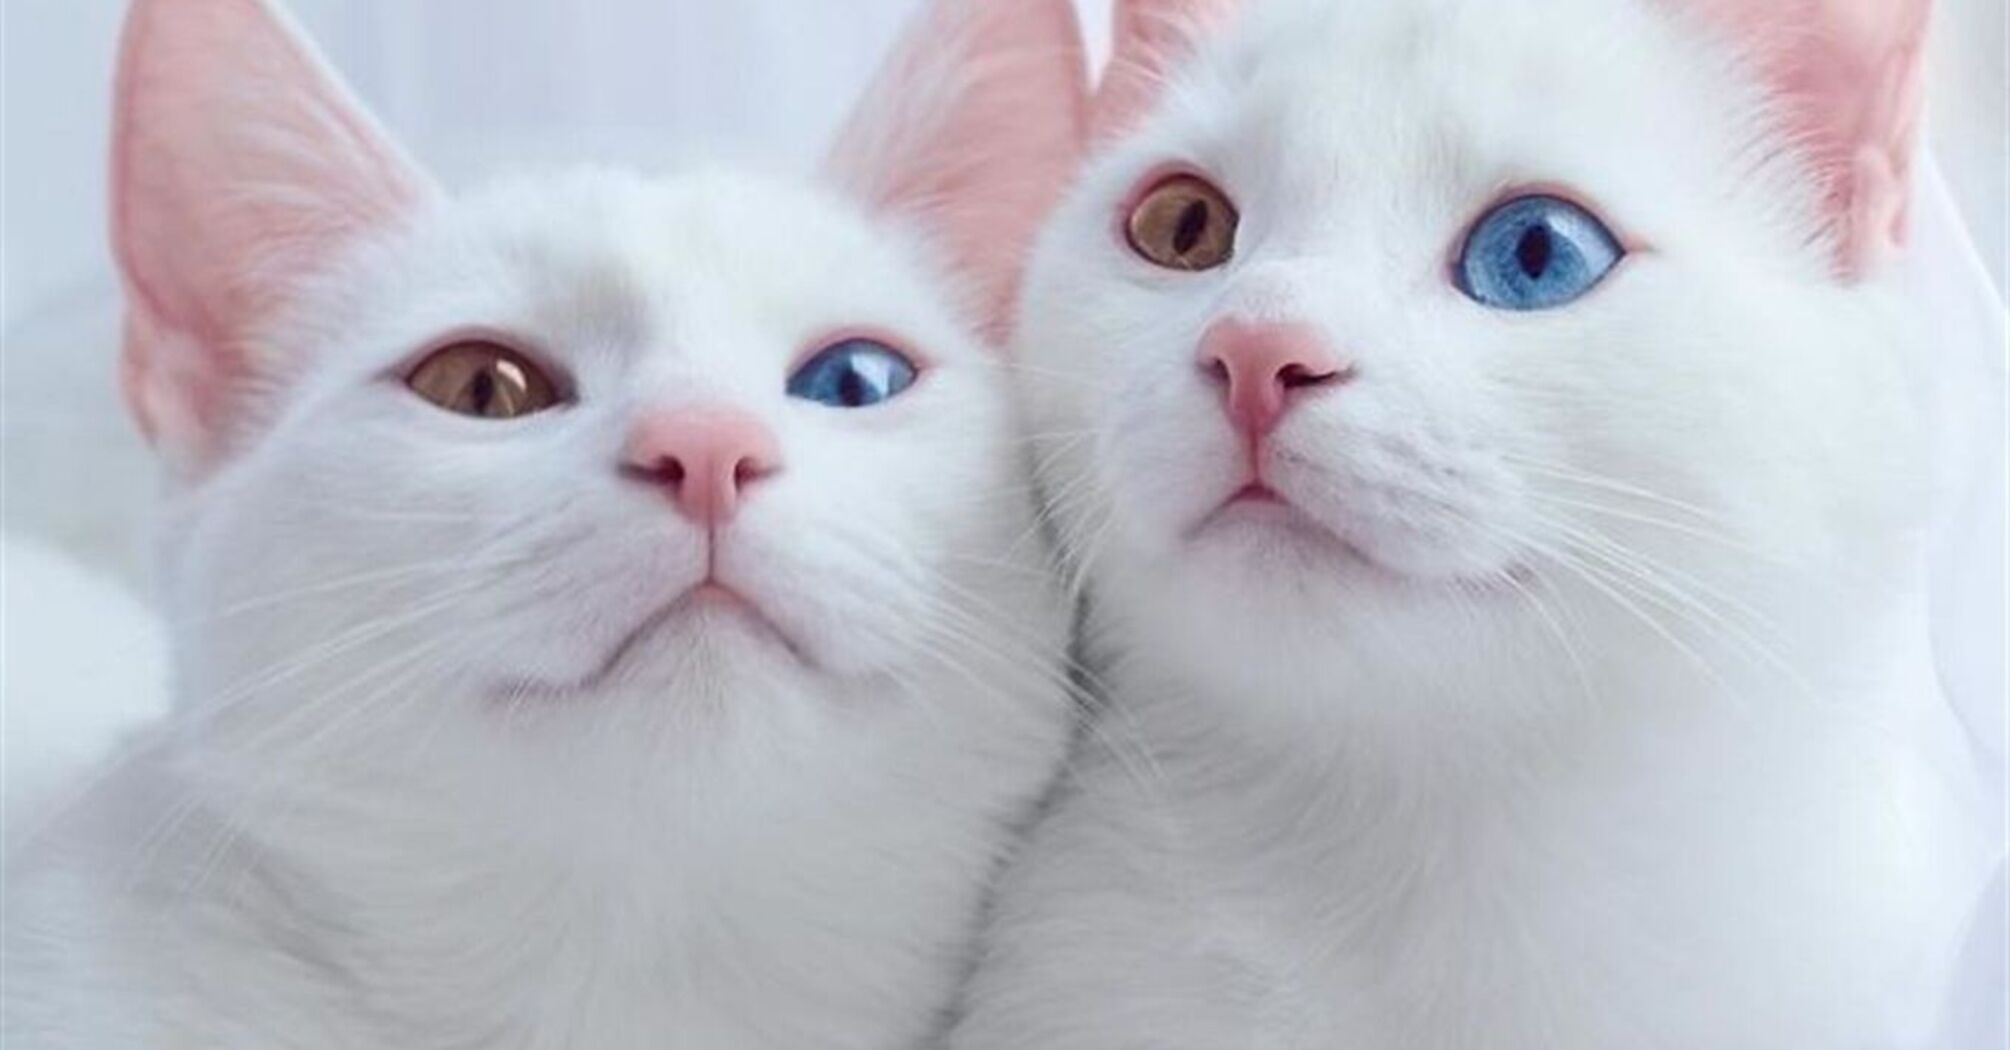 Scientists have found that people misunderstand the behavior of cats and cats' voices